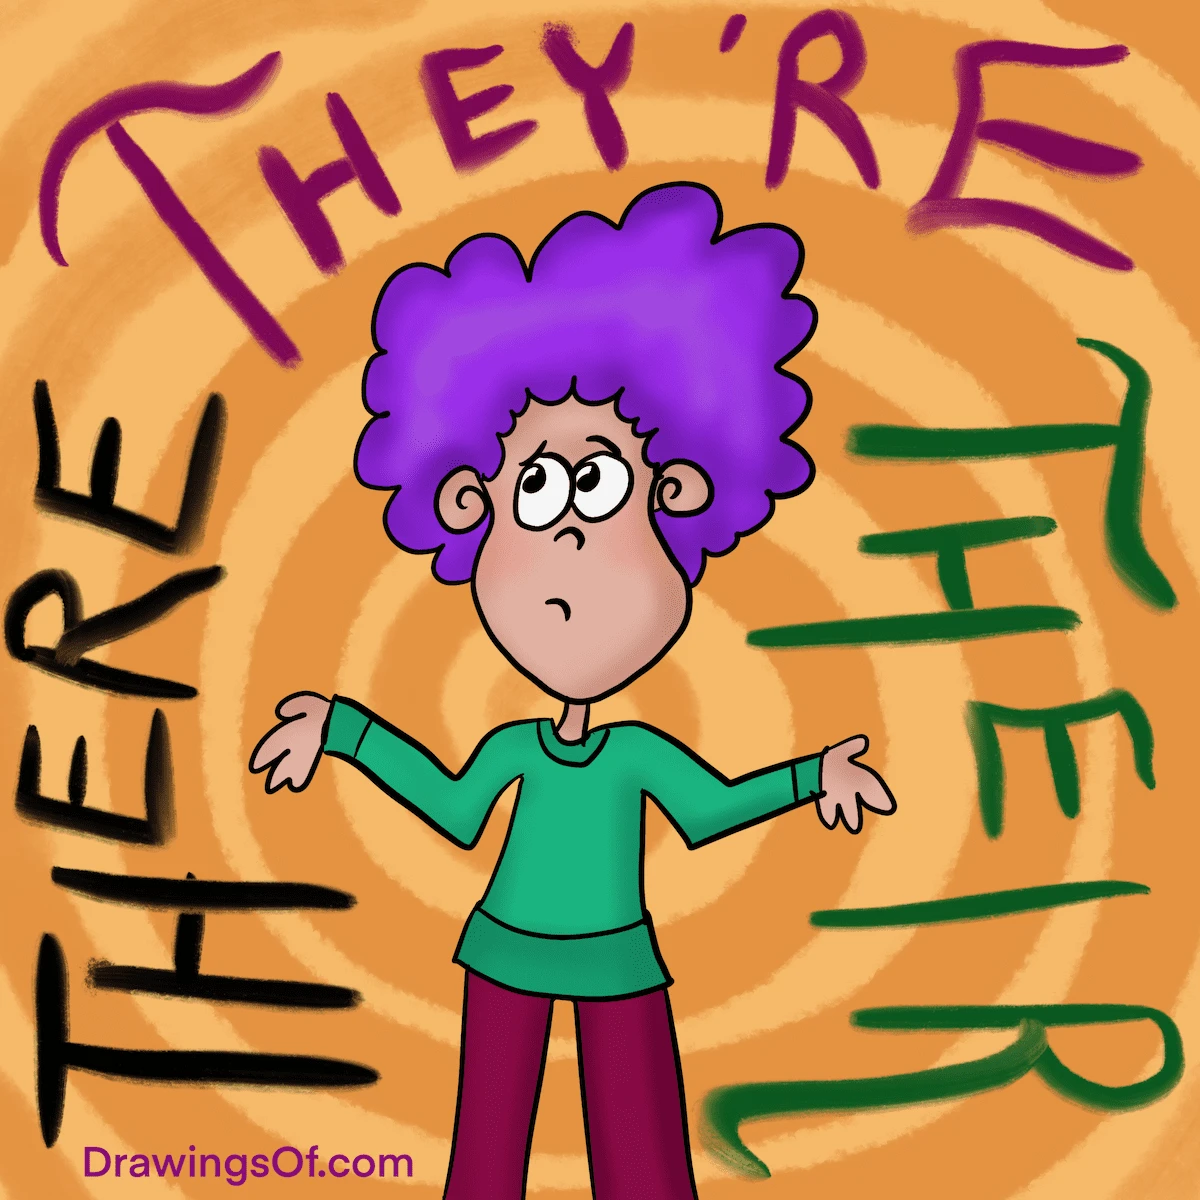 There they're or their